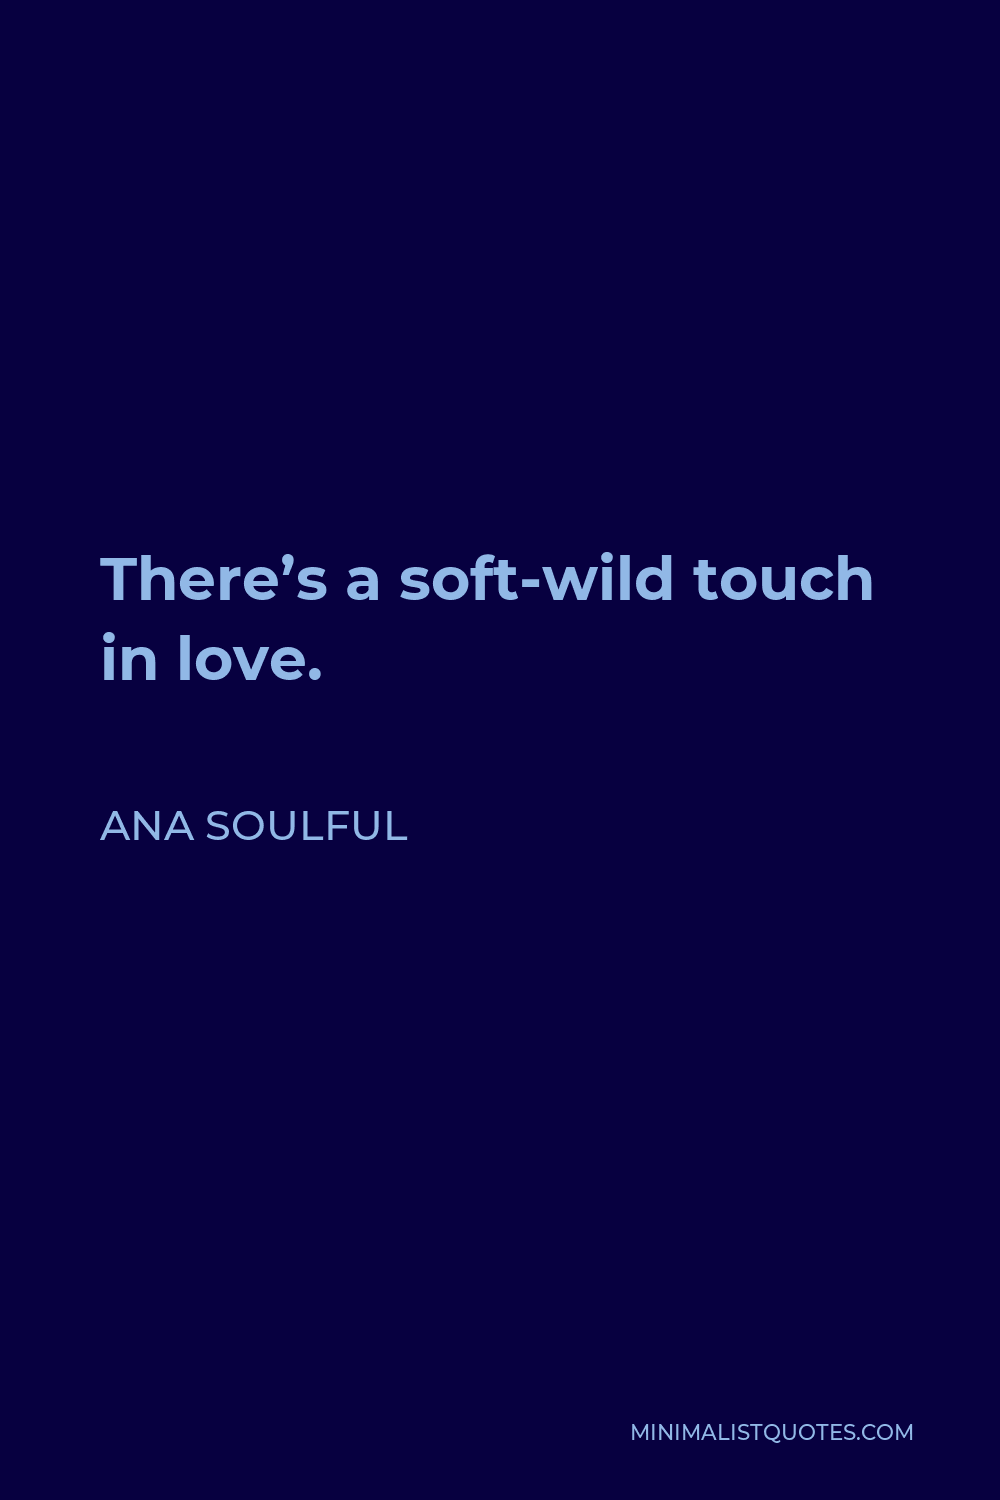 Ana Soulful Quote - There’s a soft-wild touch in love.